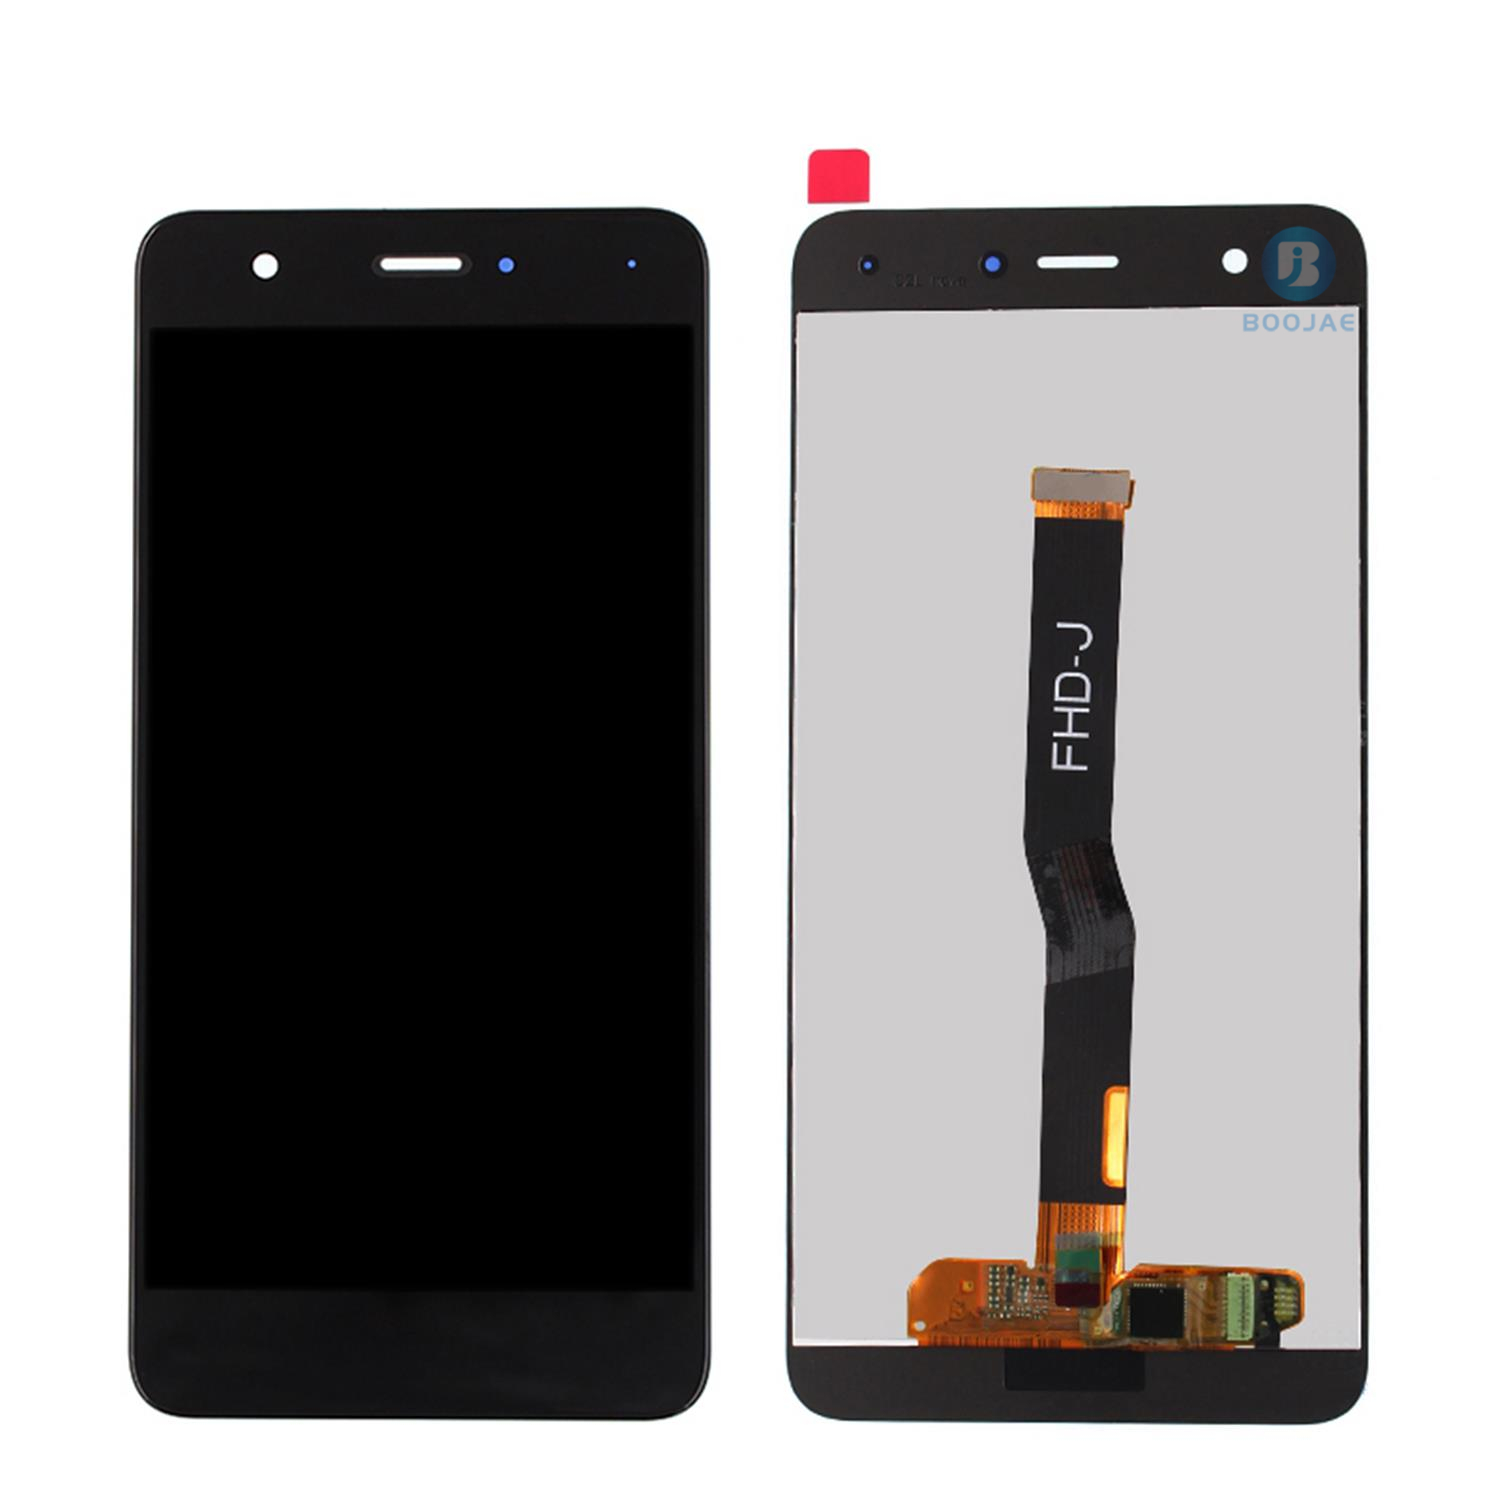 Huawei Nova Lcd Screen Display, Lcd Assembly Replacement